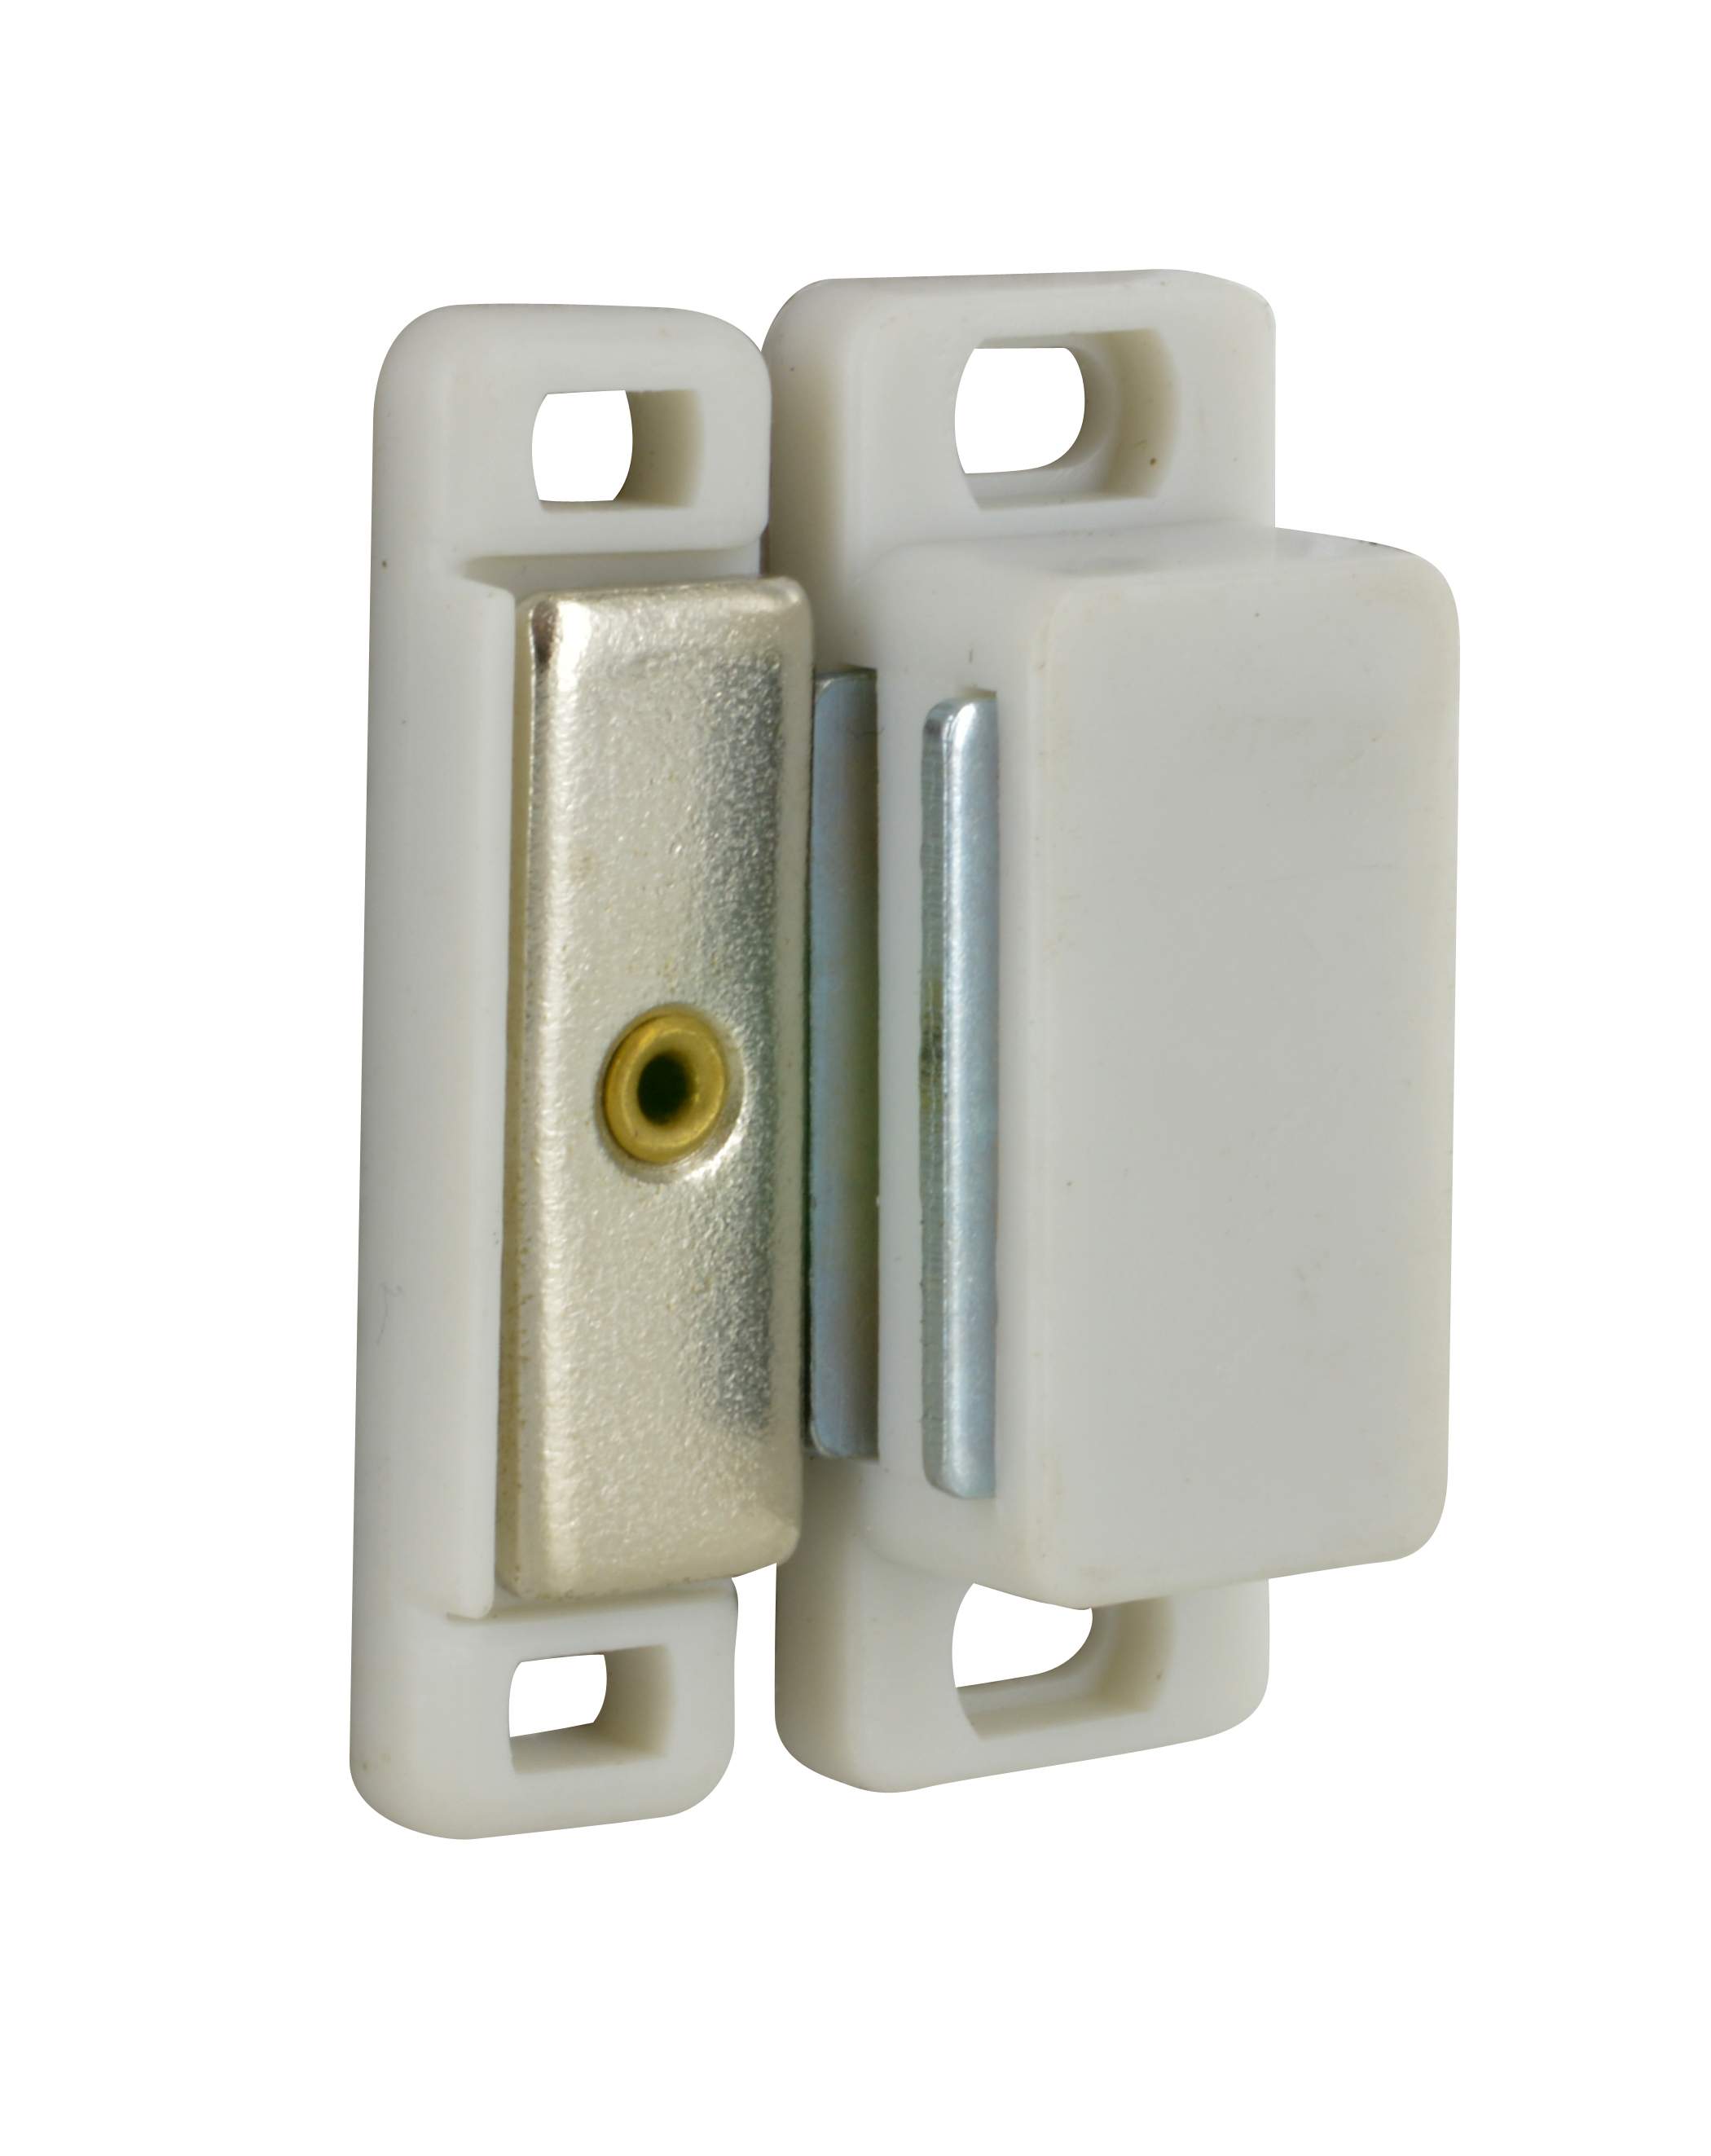 Magnetic latch white 6kg, 46x16x15 mm, 2 pieces